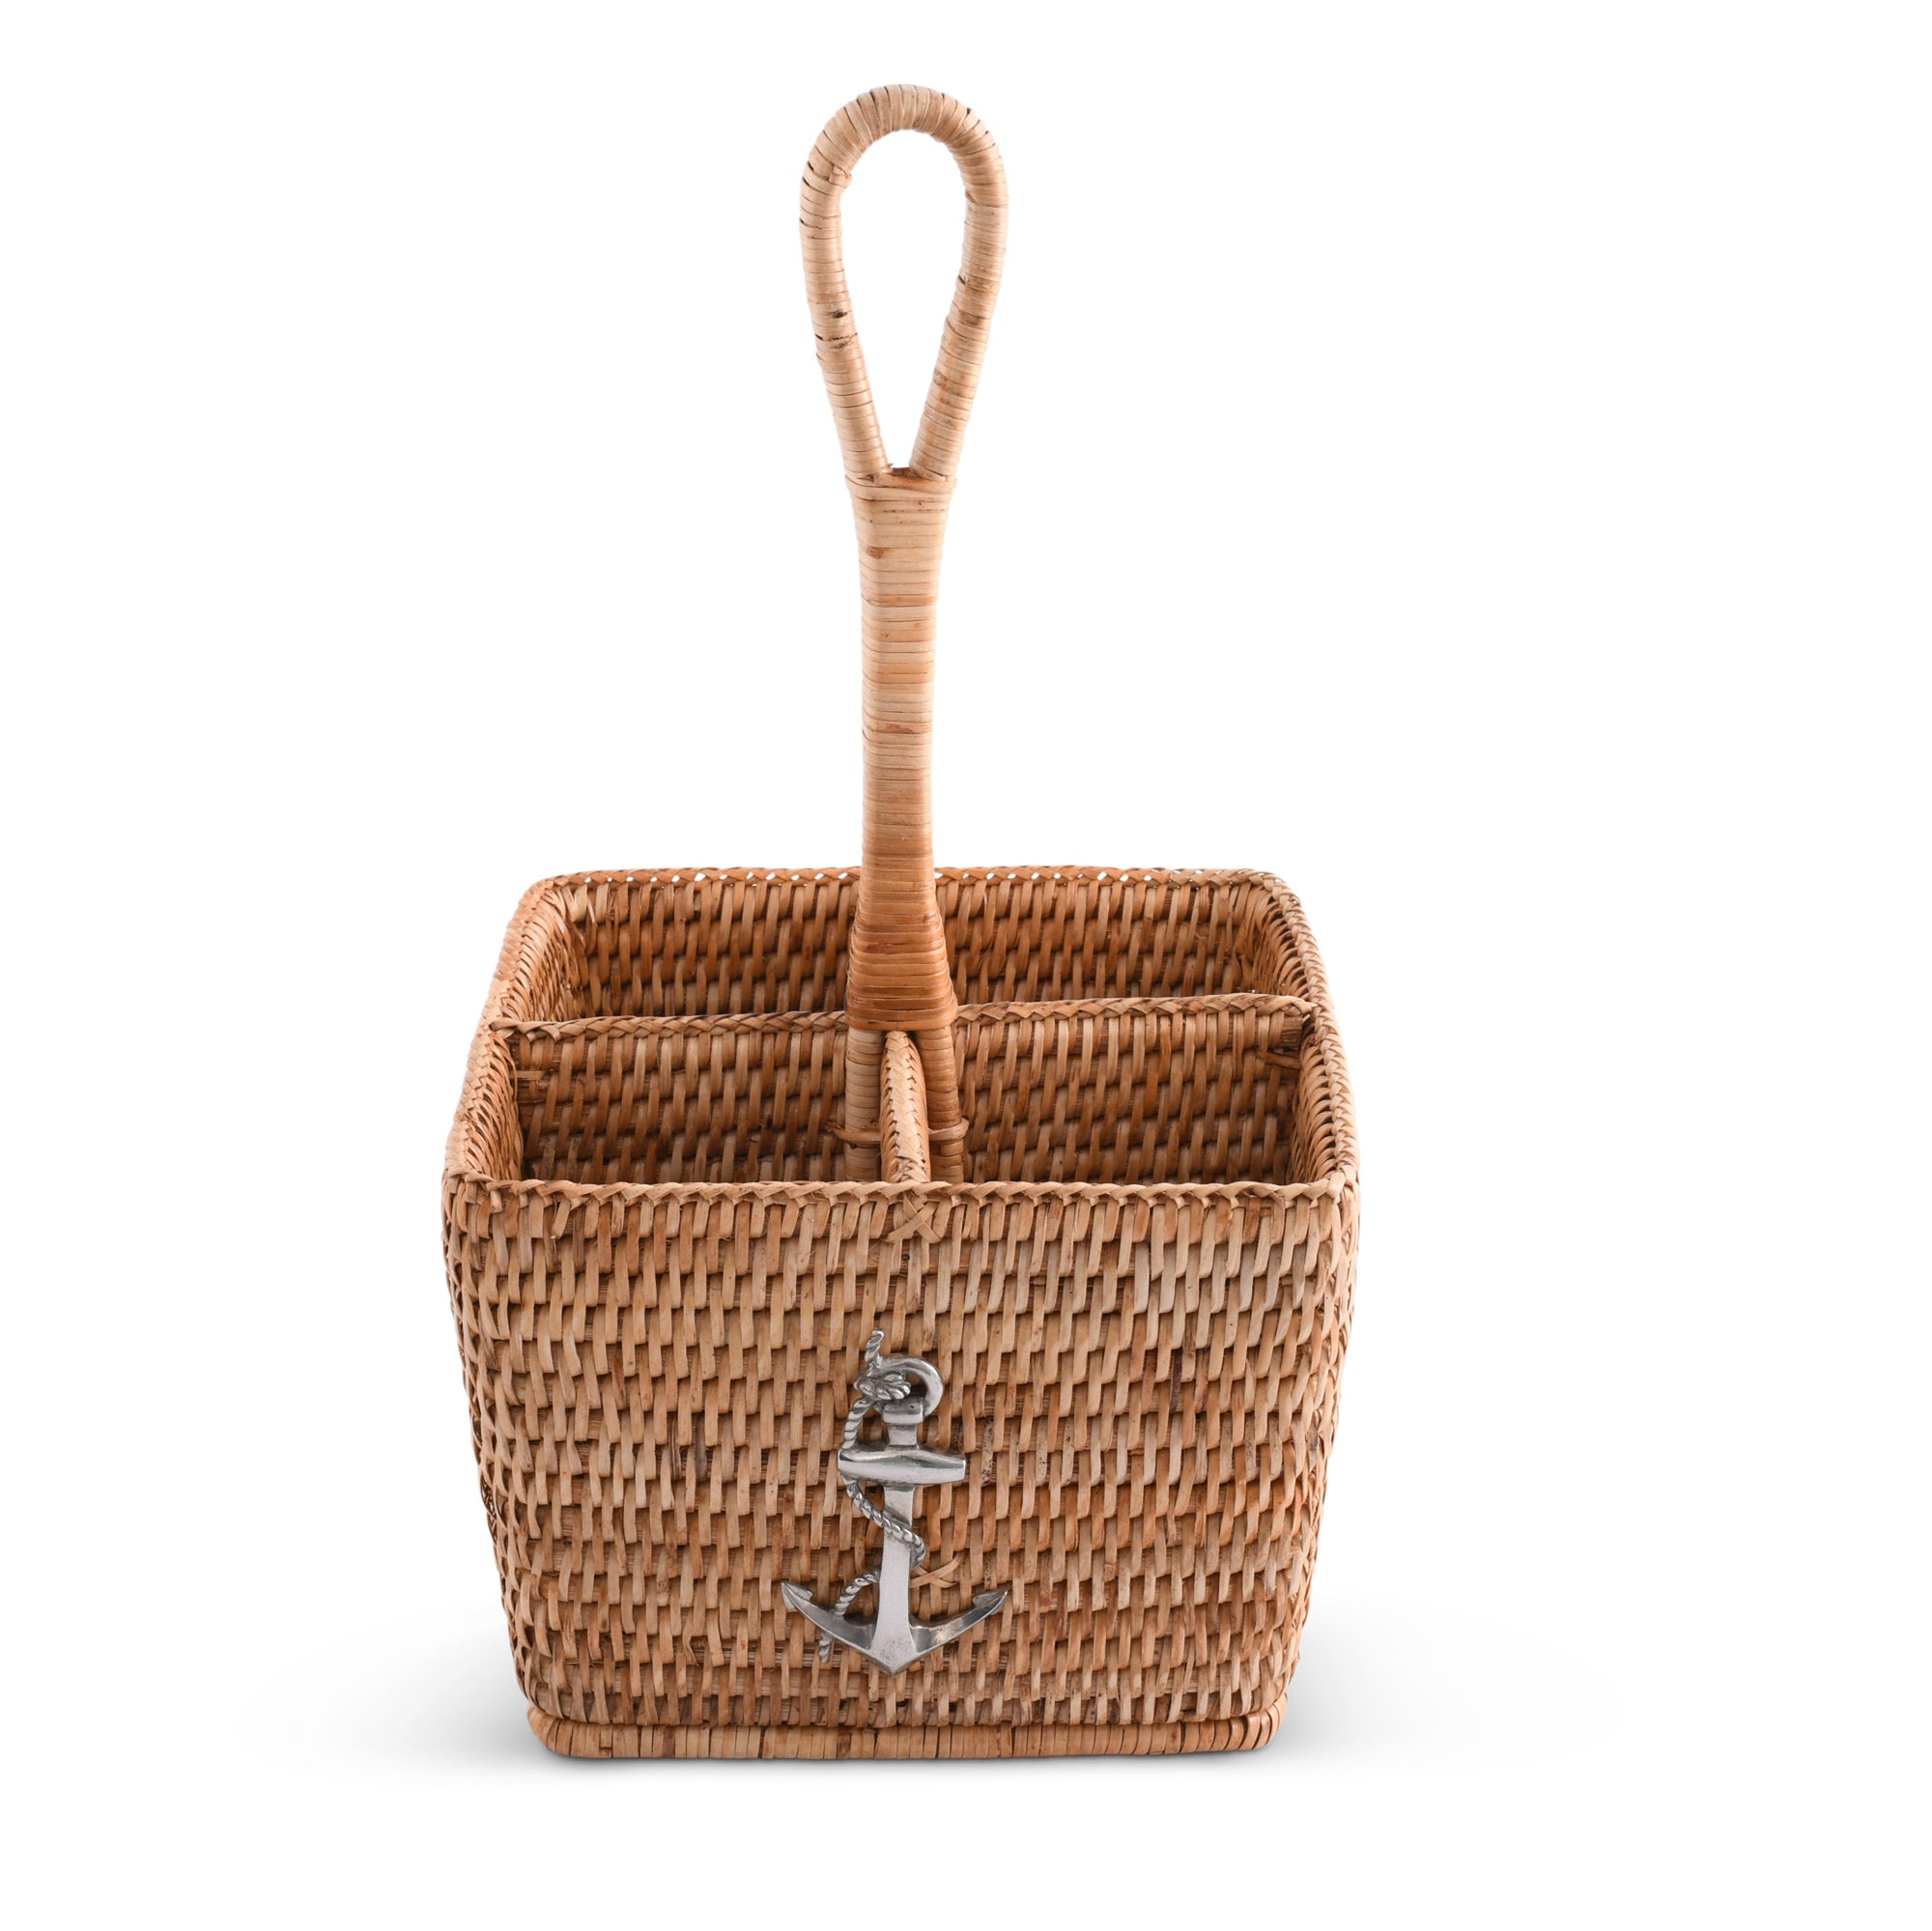 Vagabond House Anchor Hand Woven Wicker Rattan Flatware Caddy Product Image